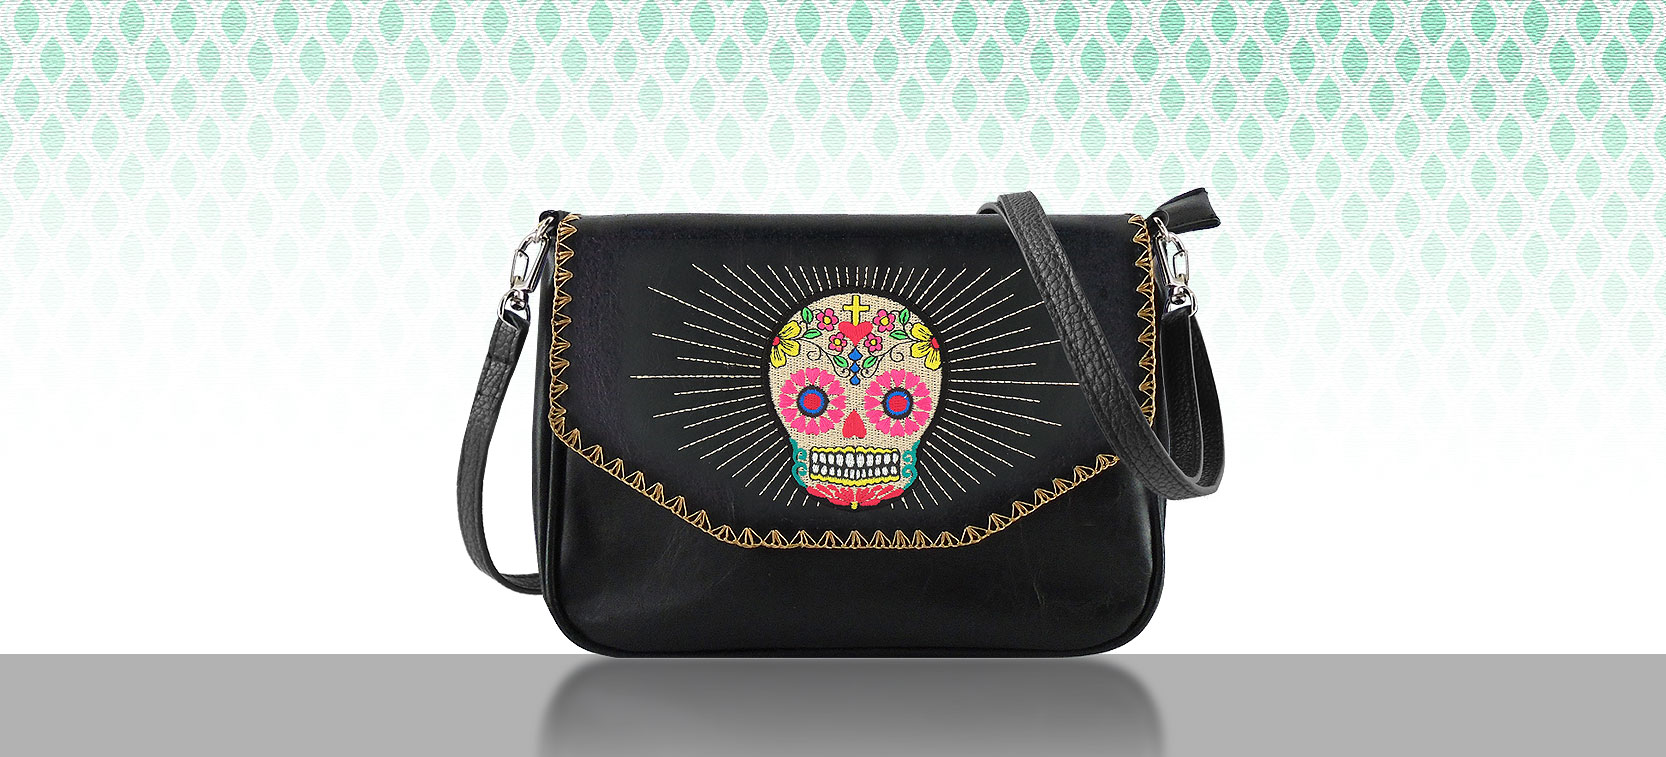 LAVISHY design and wholesale Mexico themed vegan accessories and gfits to gift shops, boutiques and book stores in Canada, USA and worldwide.